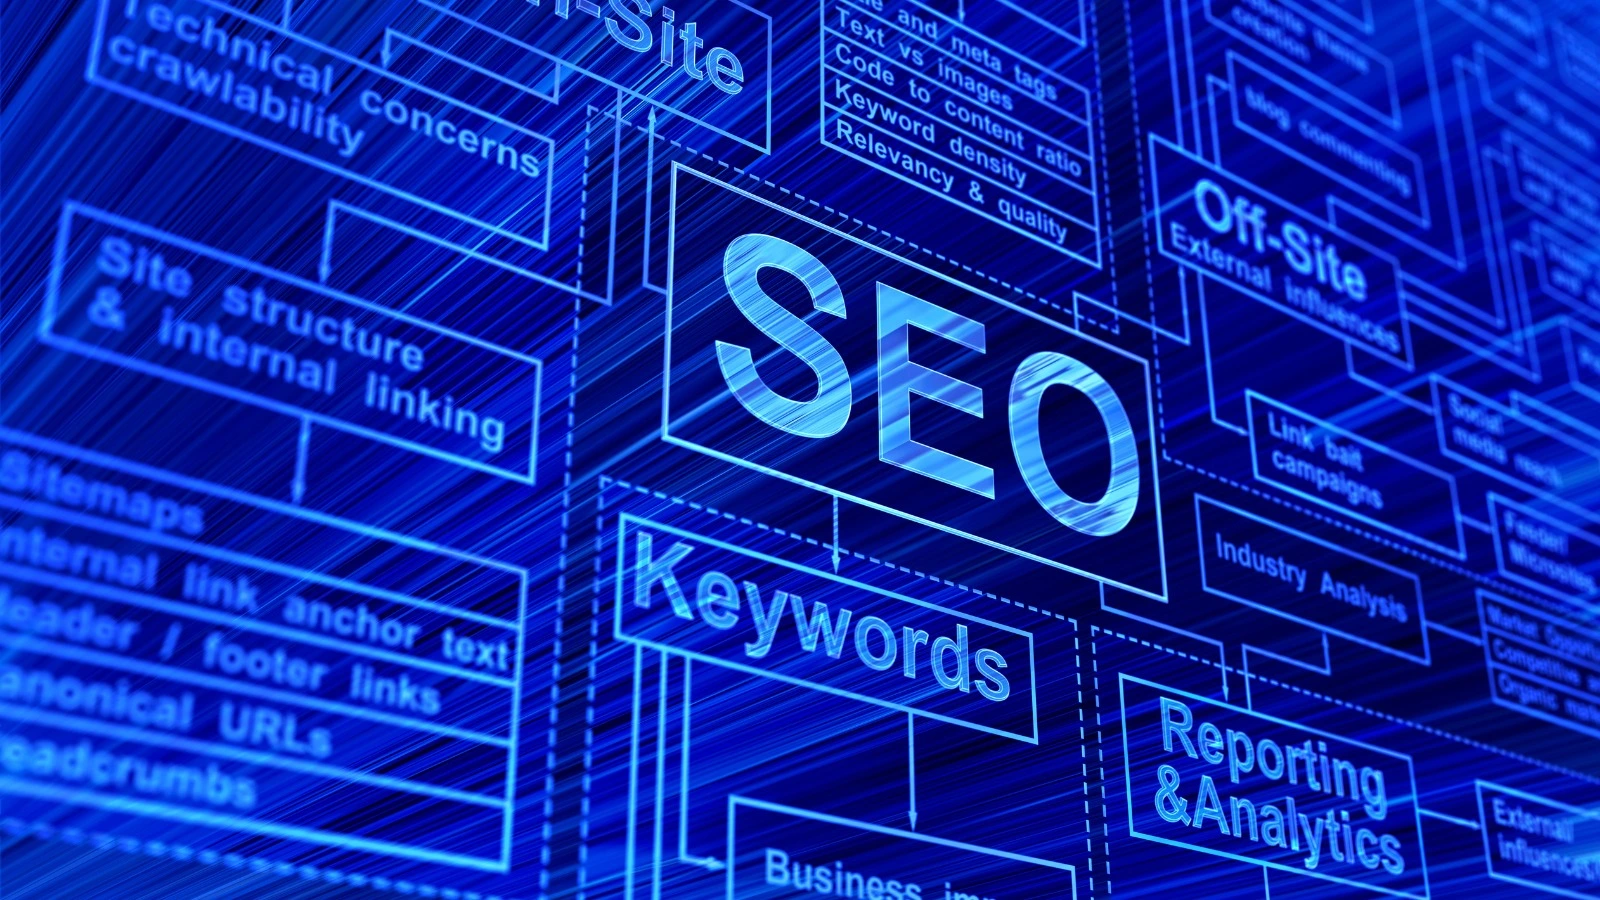 What is the importance of SEO for small businesses before Traditional Marketing